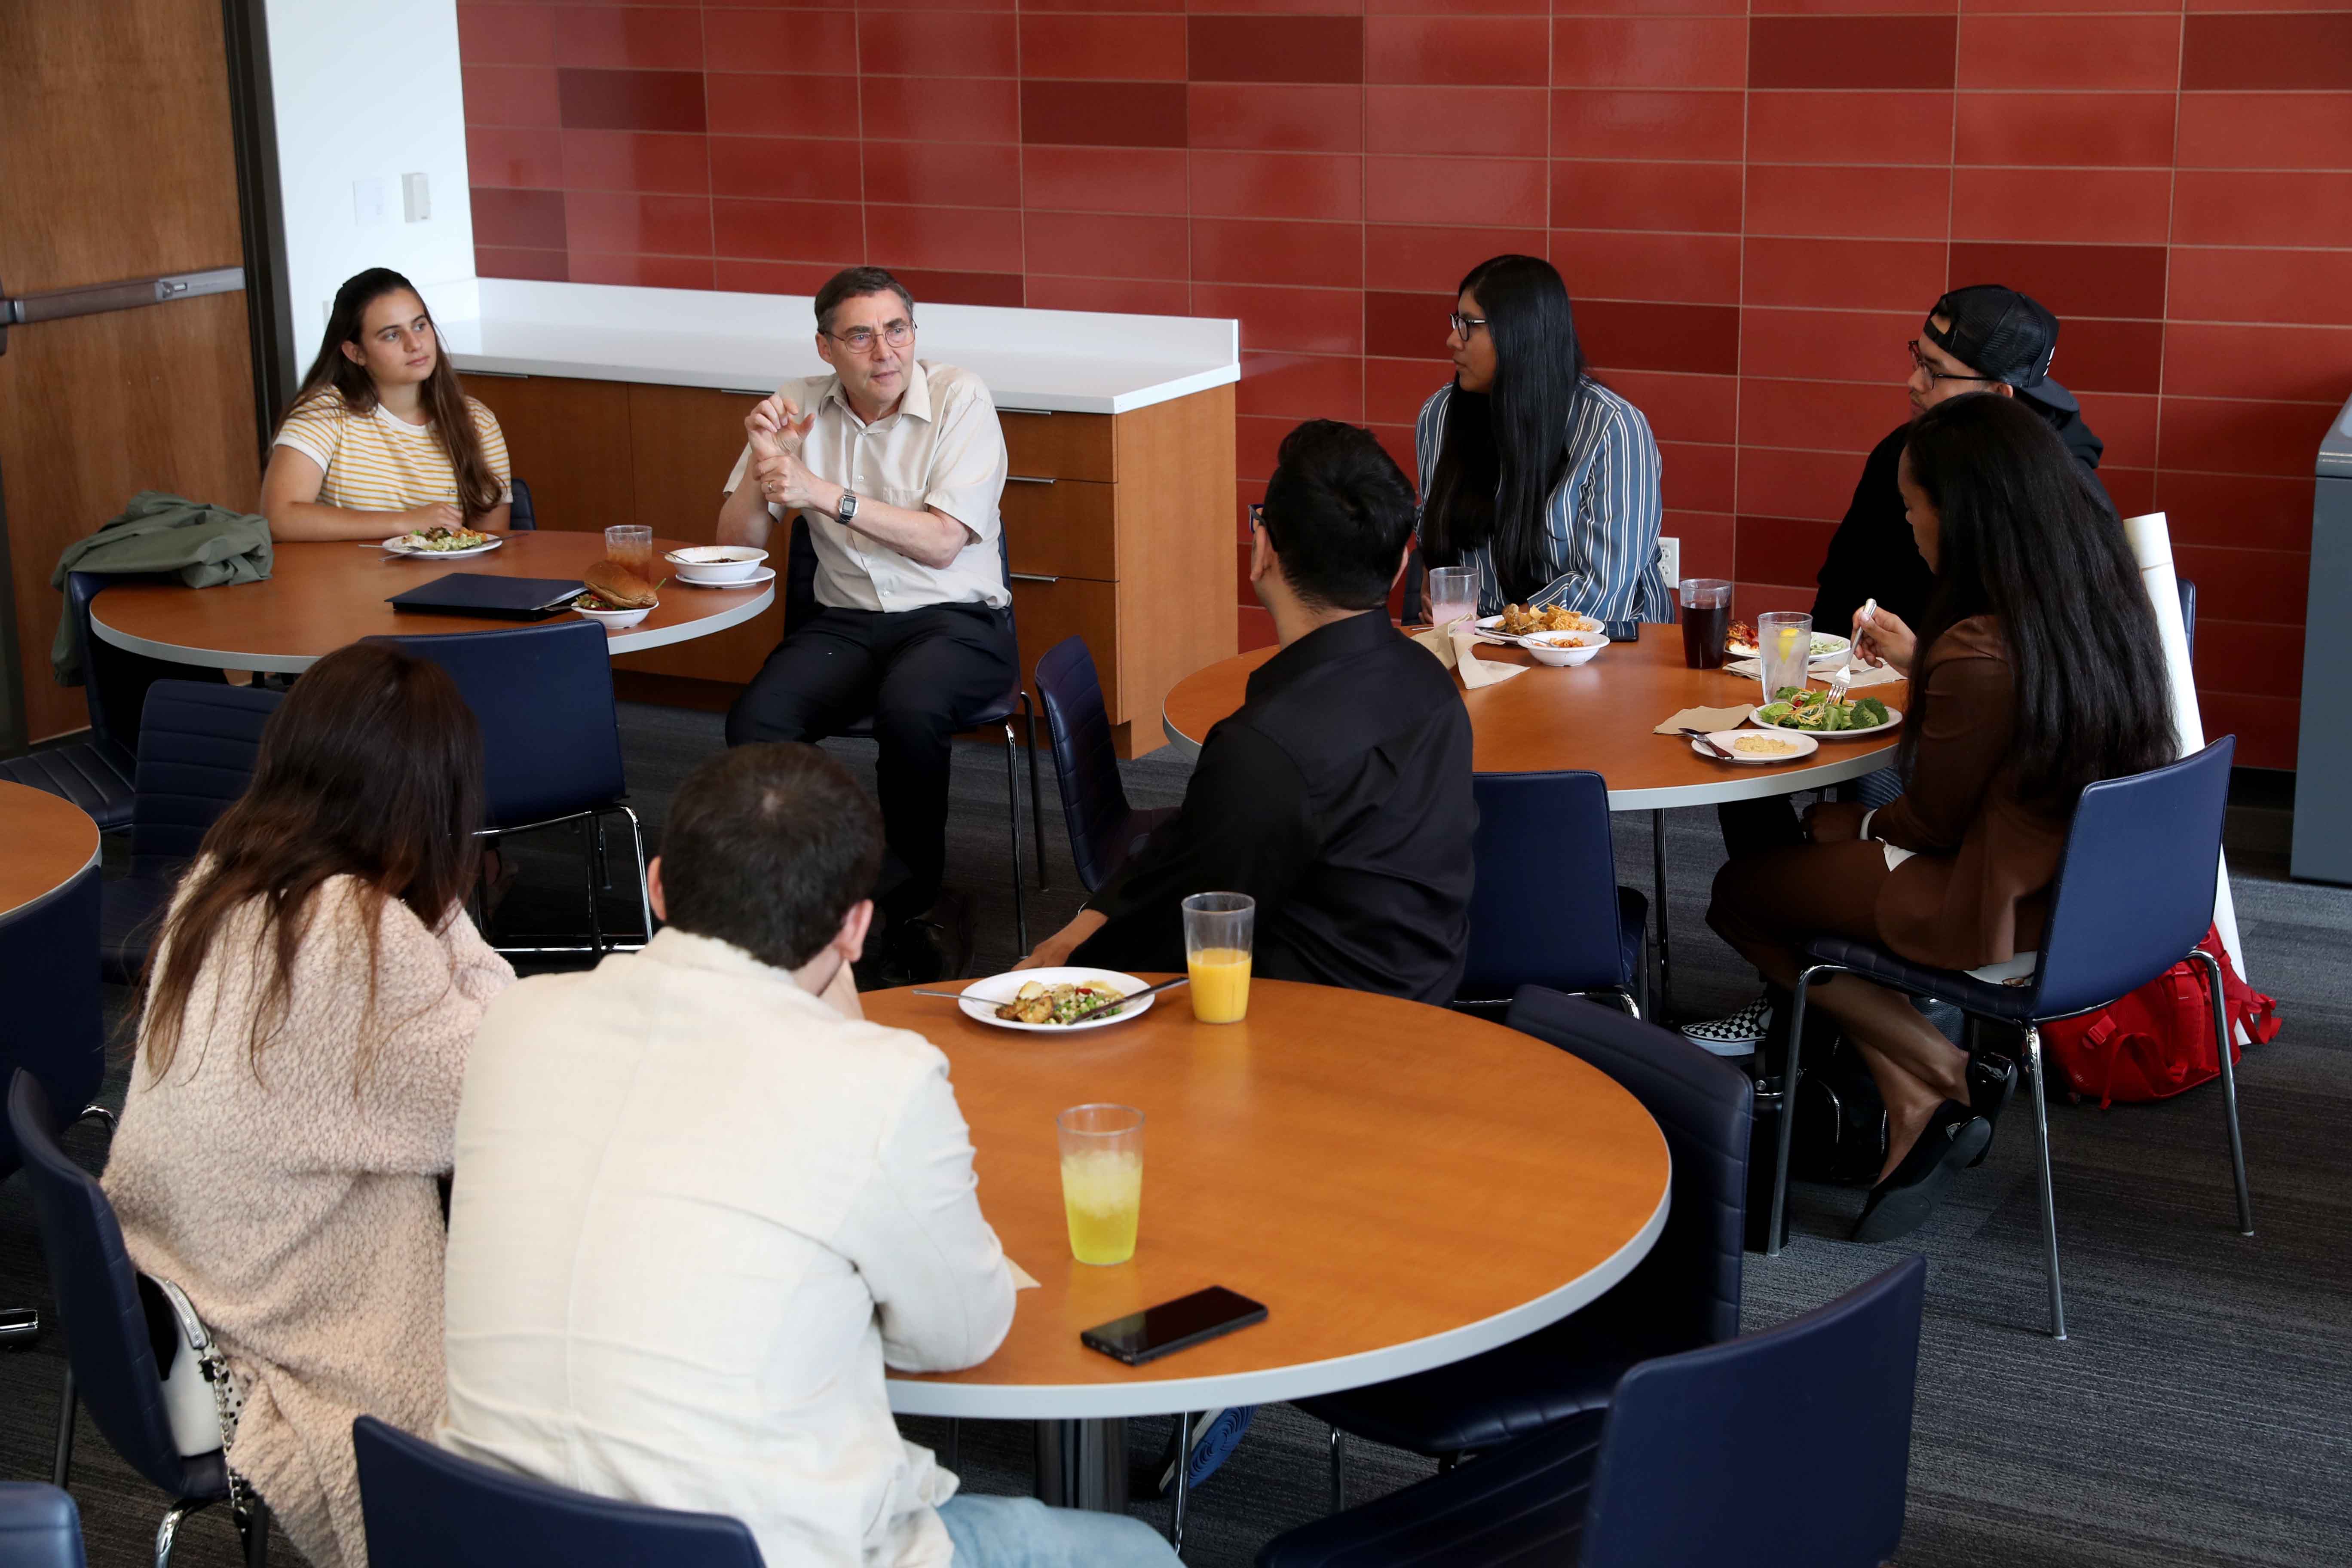 In addition to his lecture, Wieman also had lunch with select students.